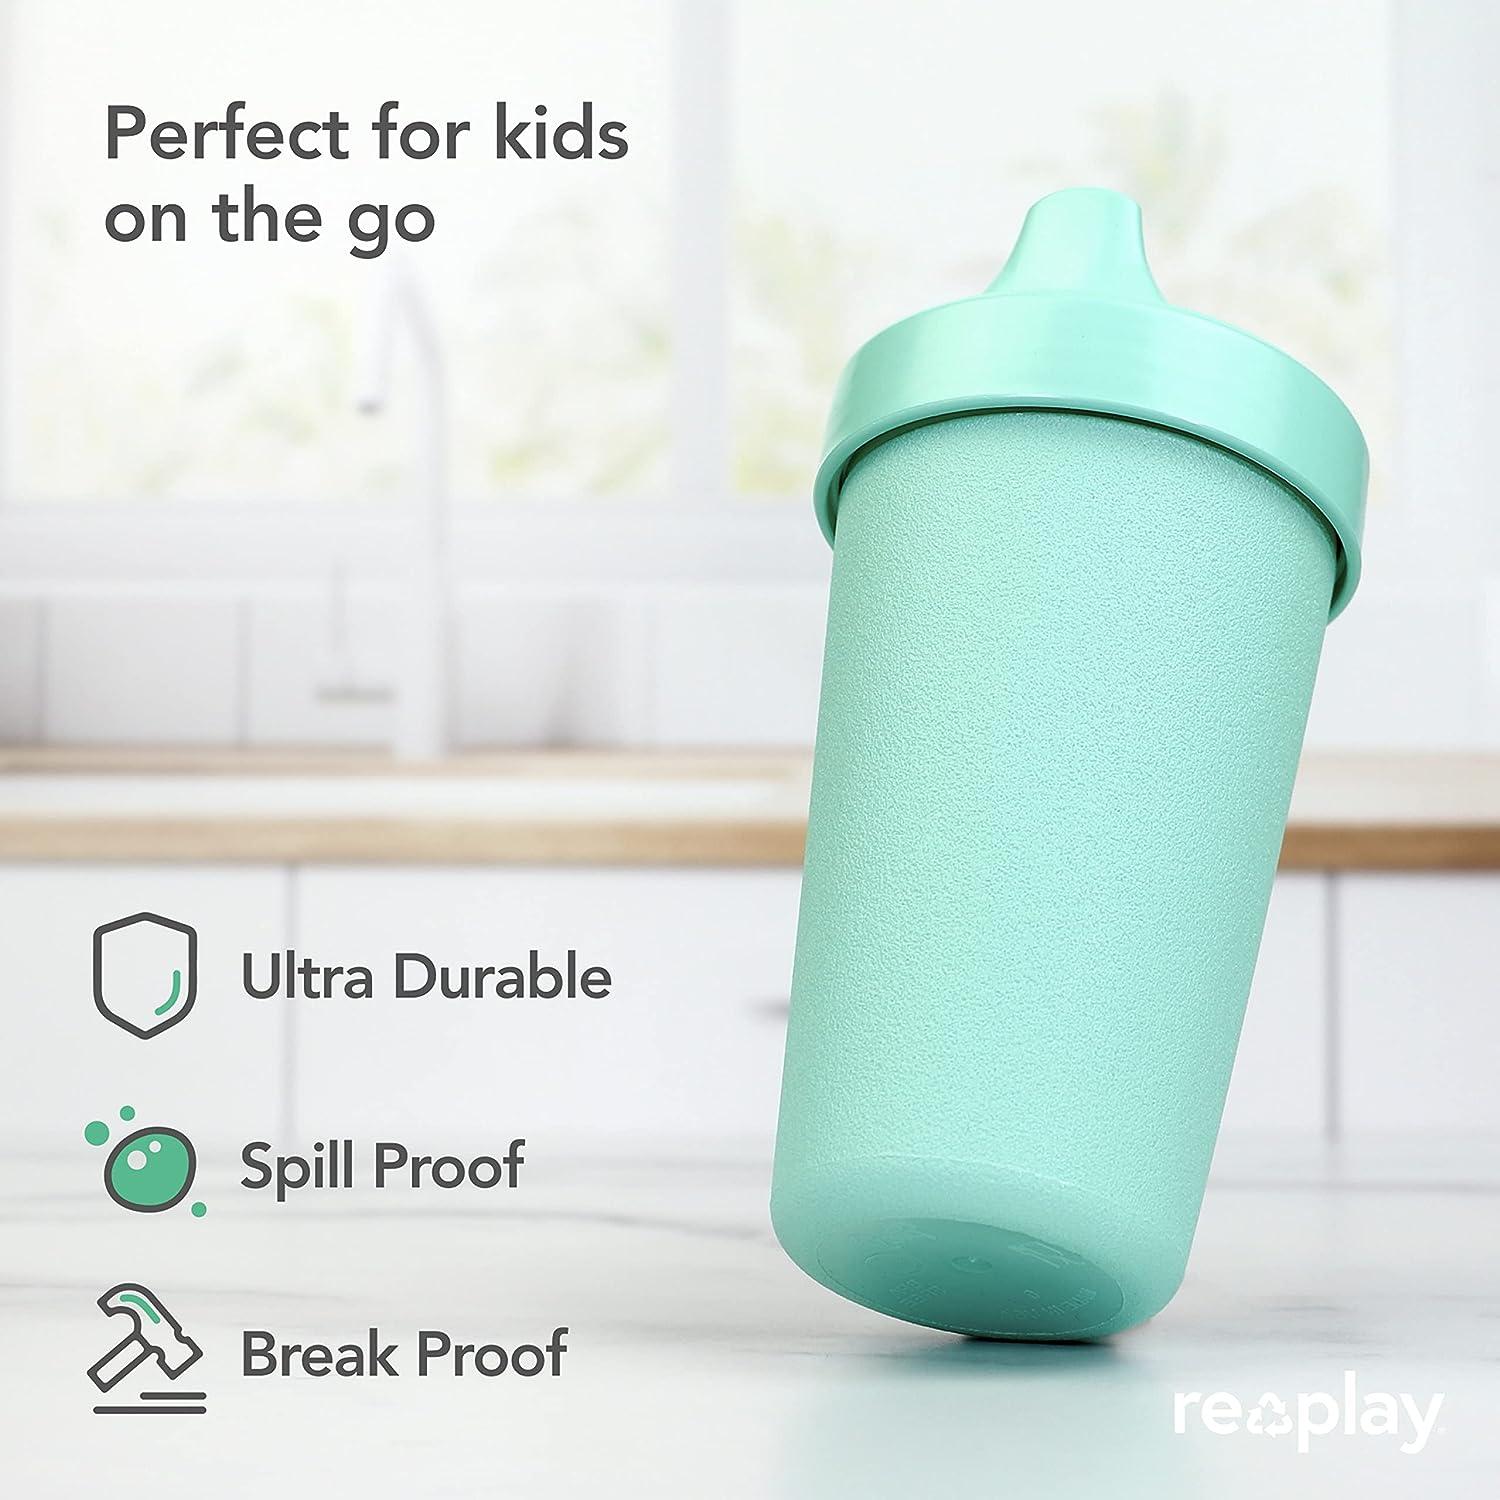 Re-Play Made in The USA 4pk No Spill Sippy Cups for Baby, Toddler, and Child Feeding - Aqua, Sunny Yellow, Lime Green, Teal